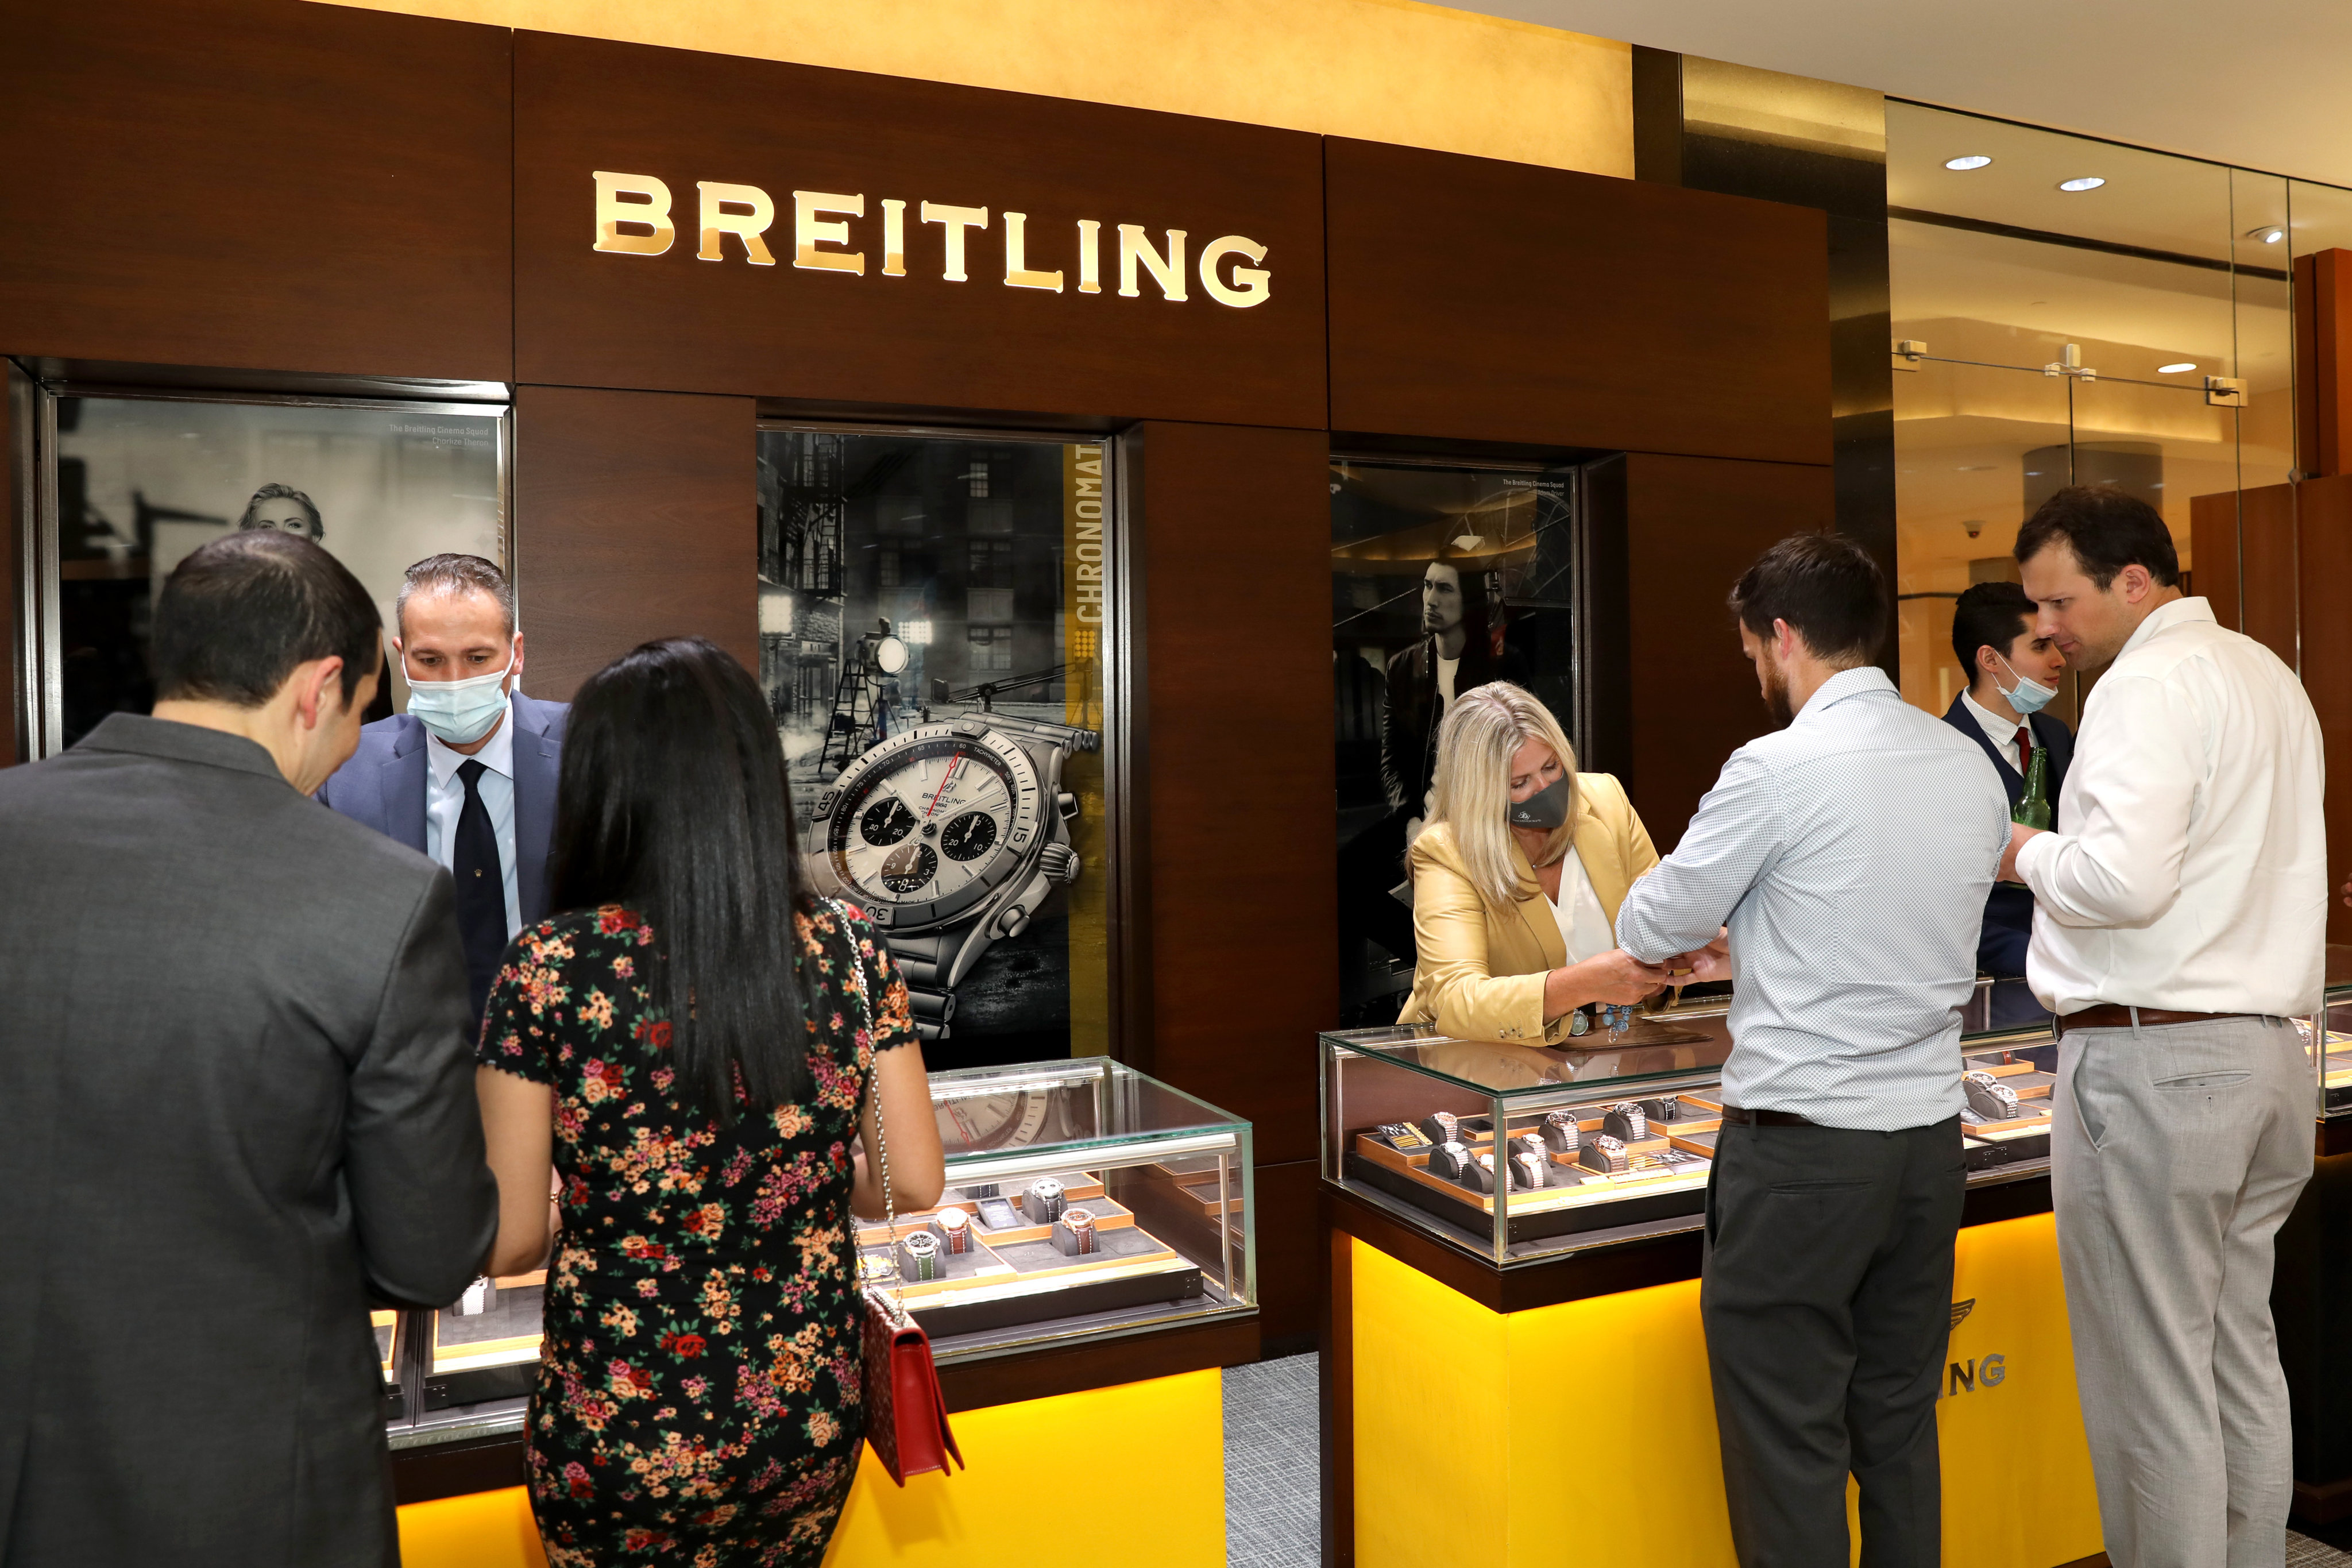 Breitling partners with American Airlines to unveil the All-New Breitling Navitimer American Airlines Limited Edition Watch at Bachendorf’s Galleria Dallas in September 2021, in Dallas, Texas. Photo: Getty Images for Breitling)